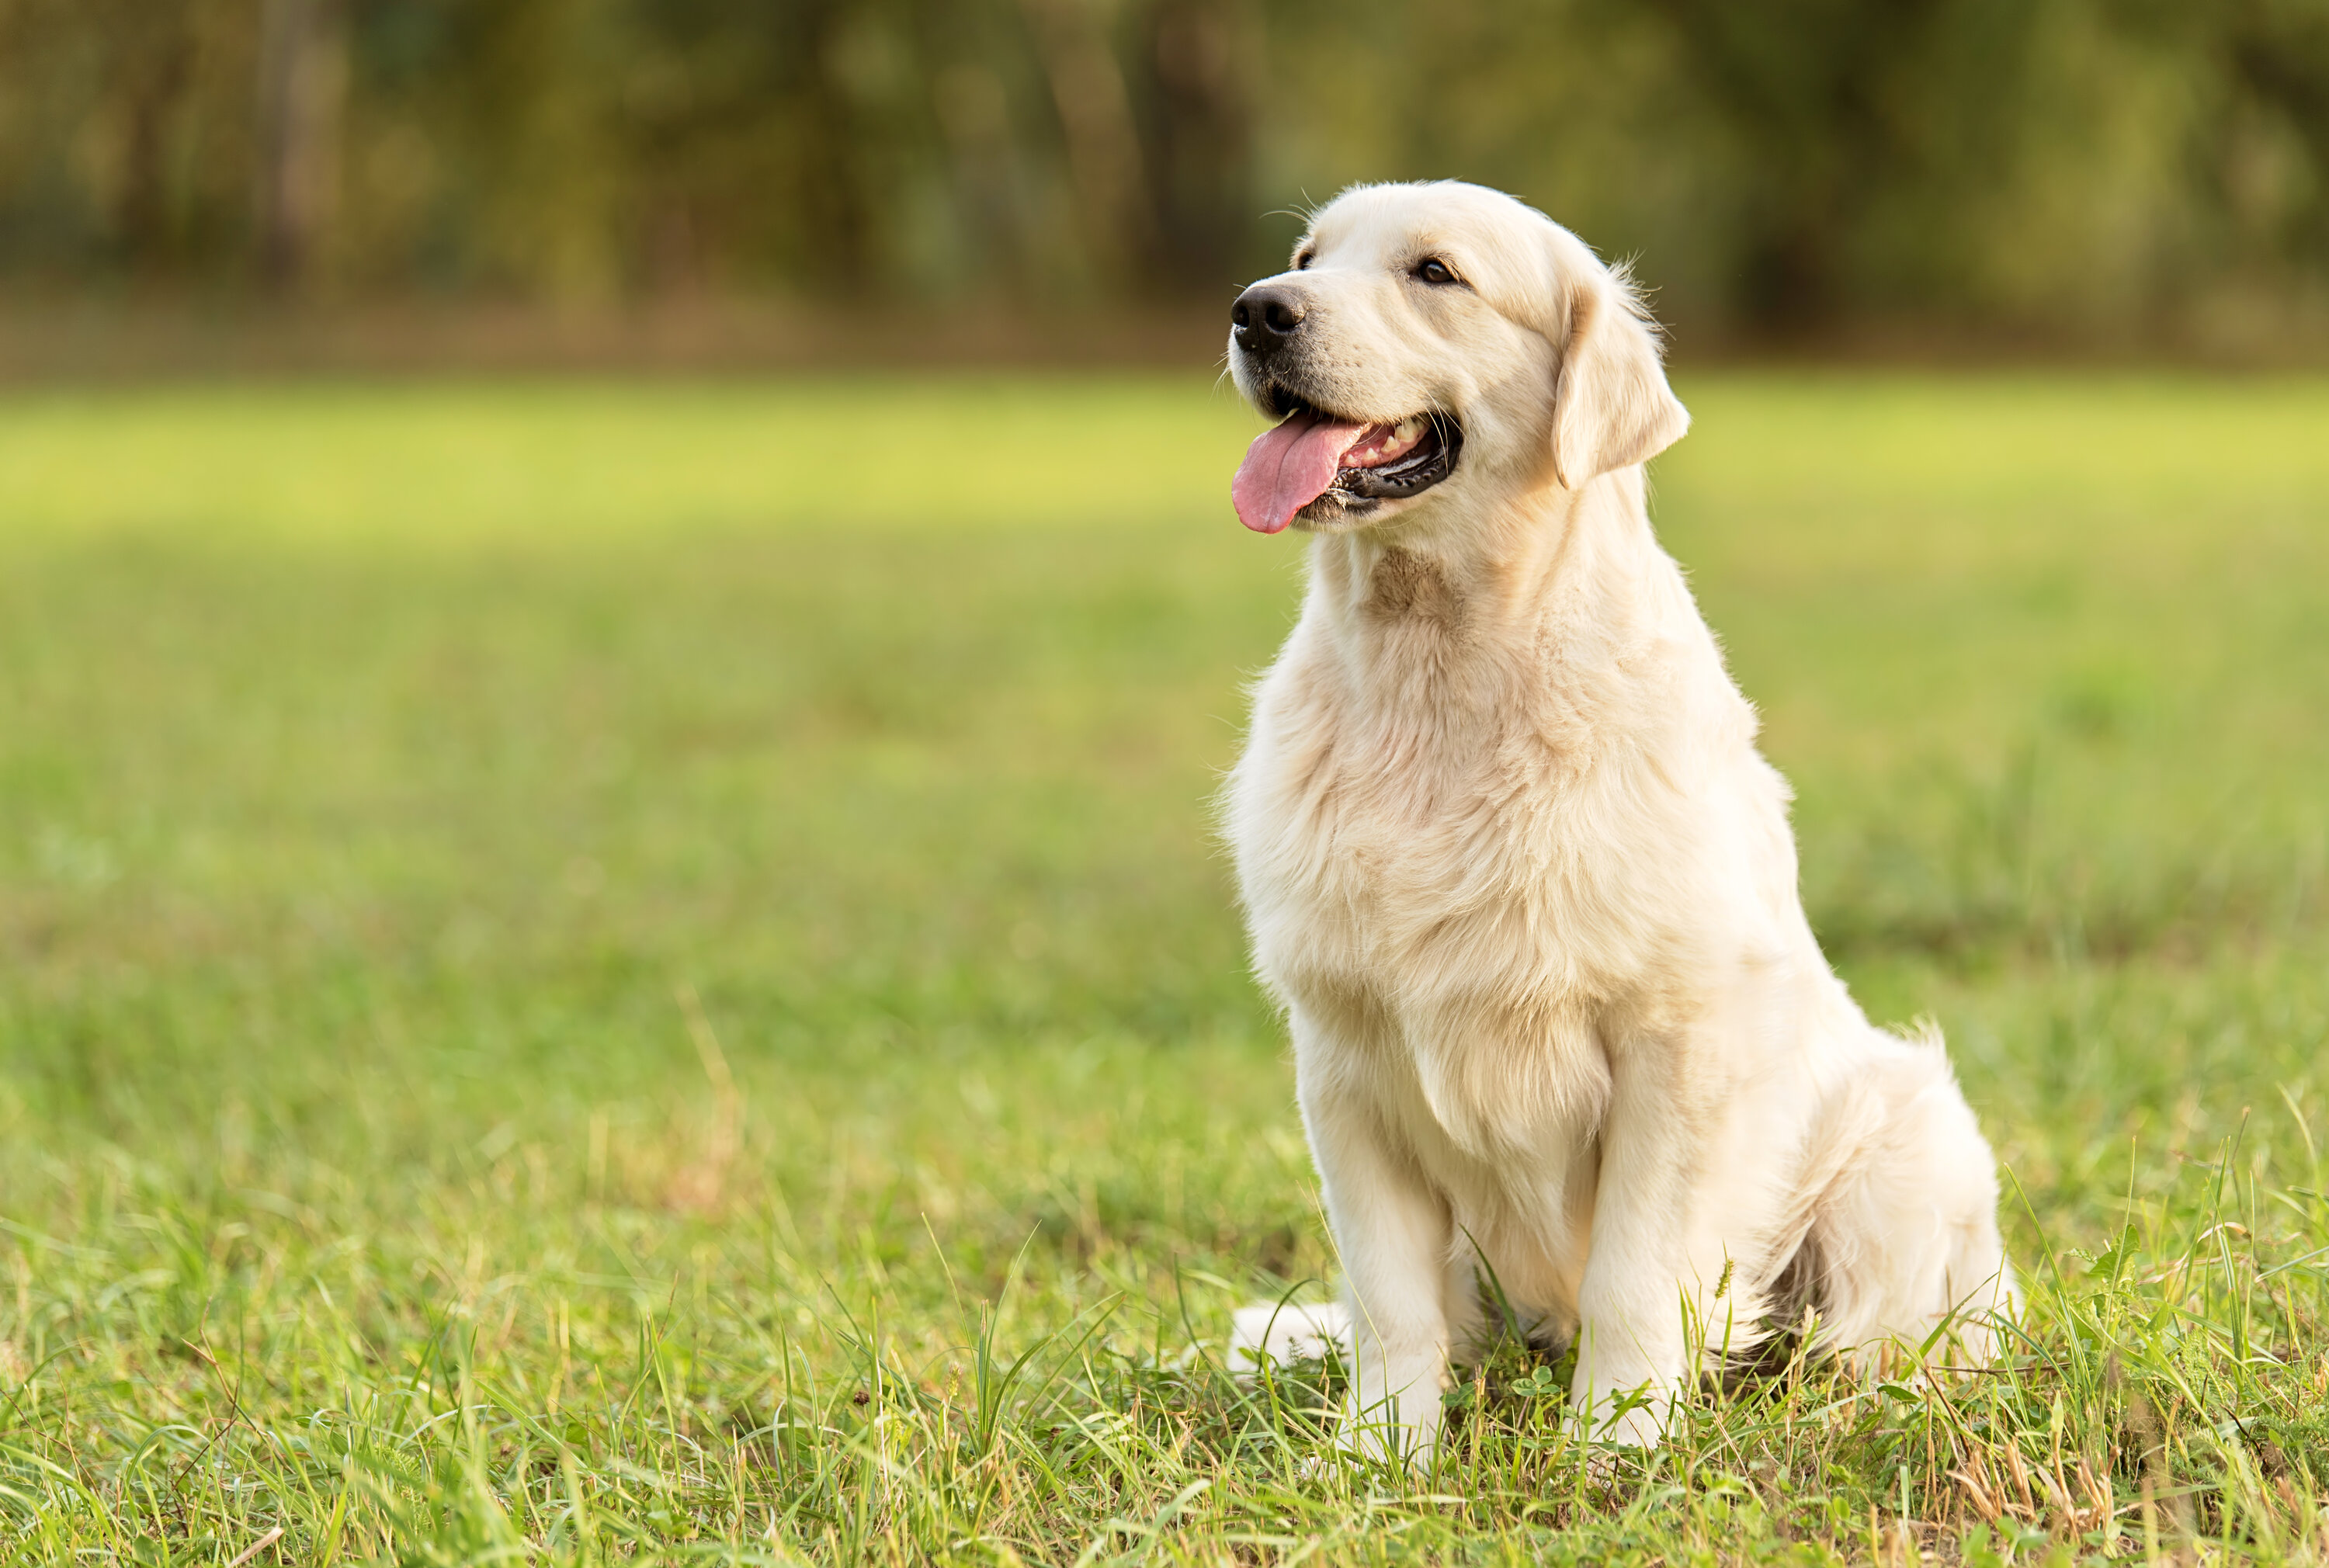 A cream-colored white long haired Labrador sitting in a field of grass looking away from the camera